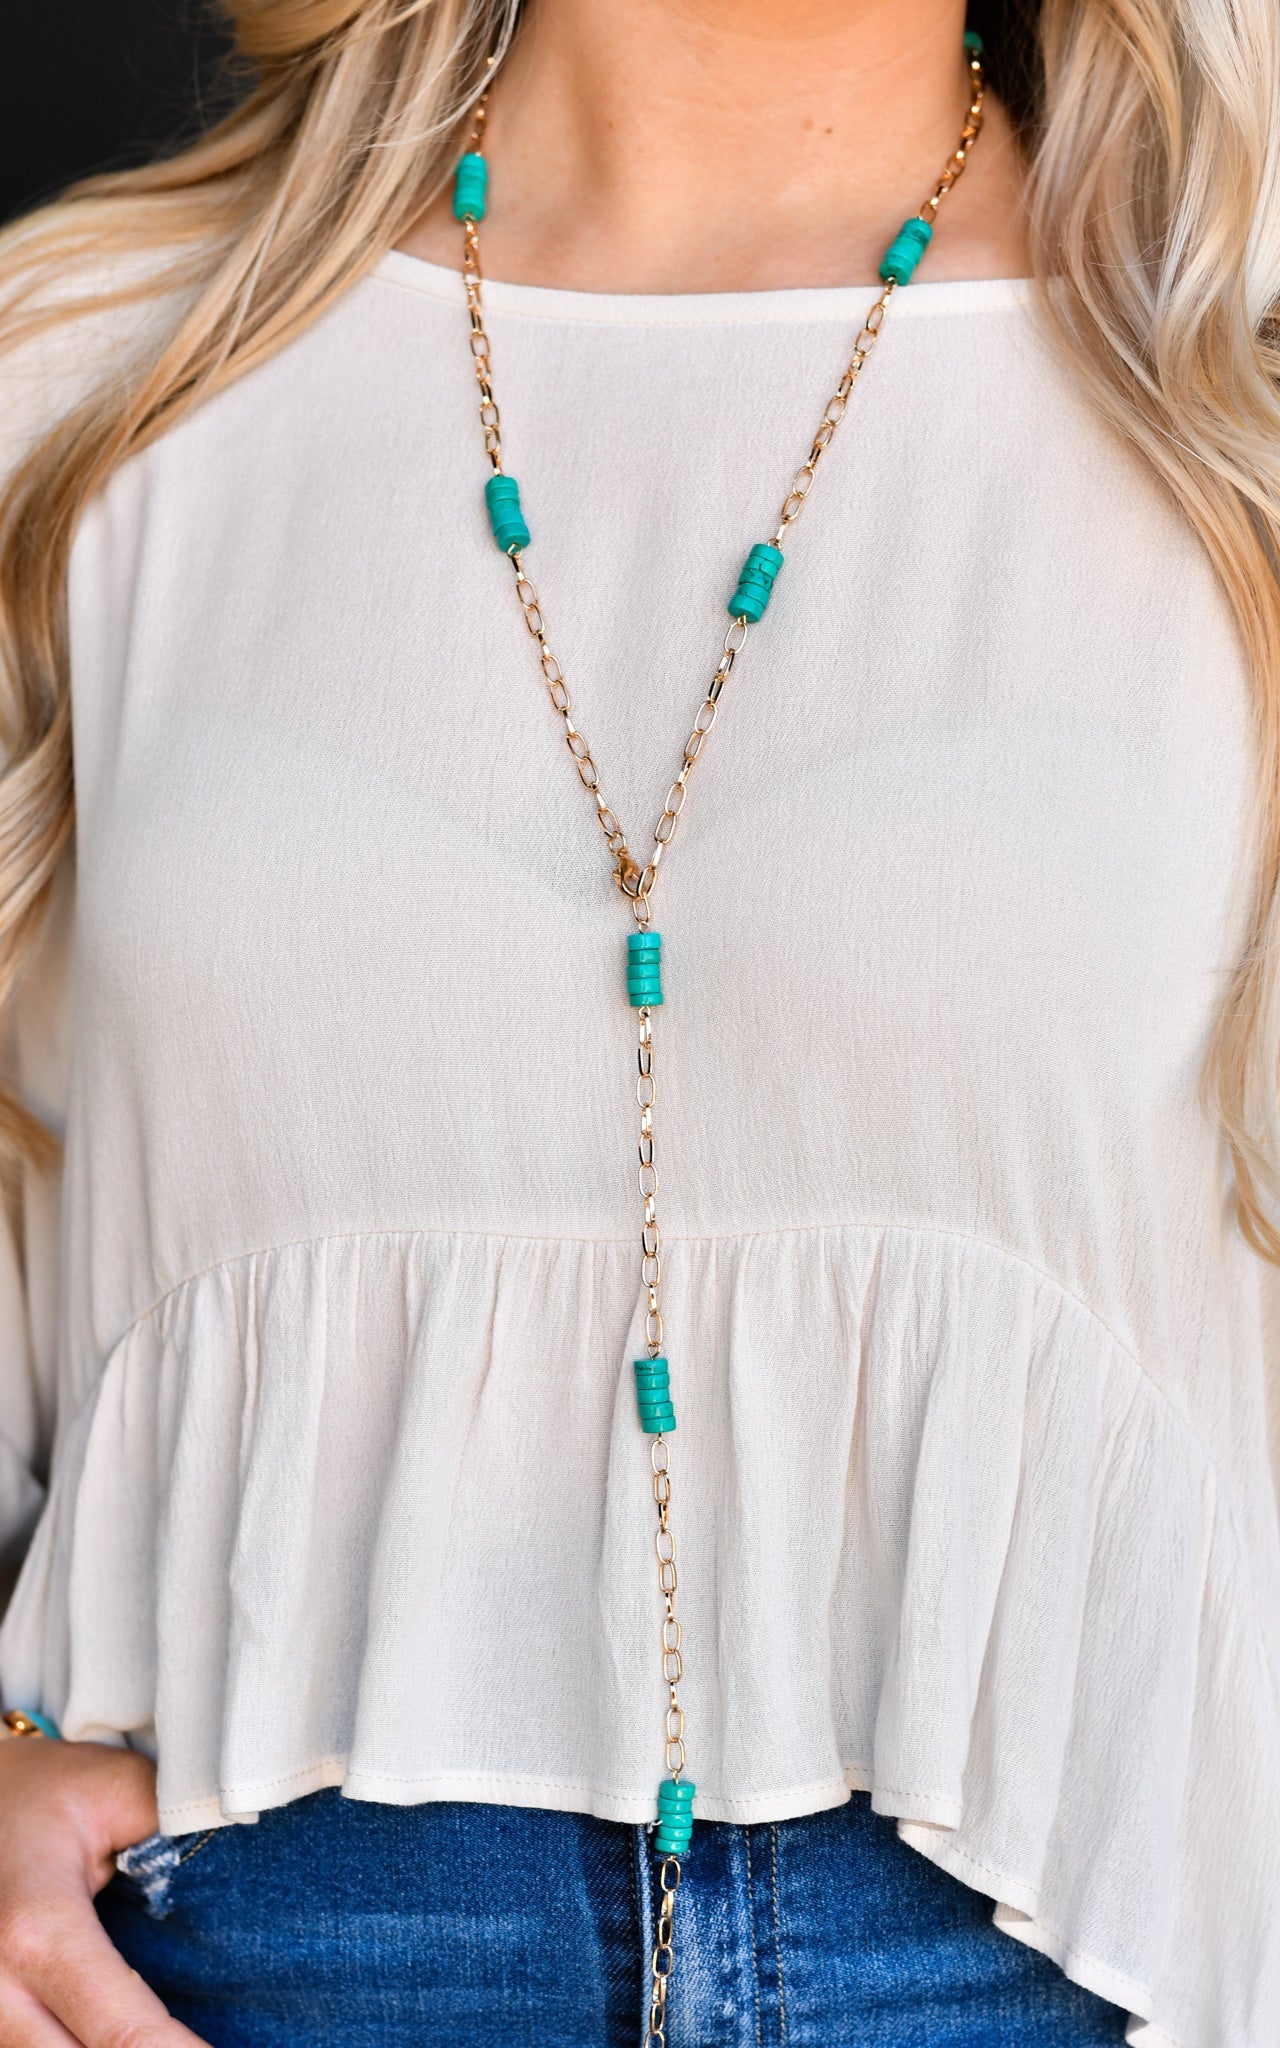 Multi Way Chain Link Necklace with Turquoise Accents